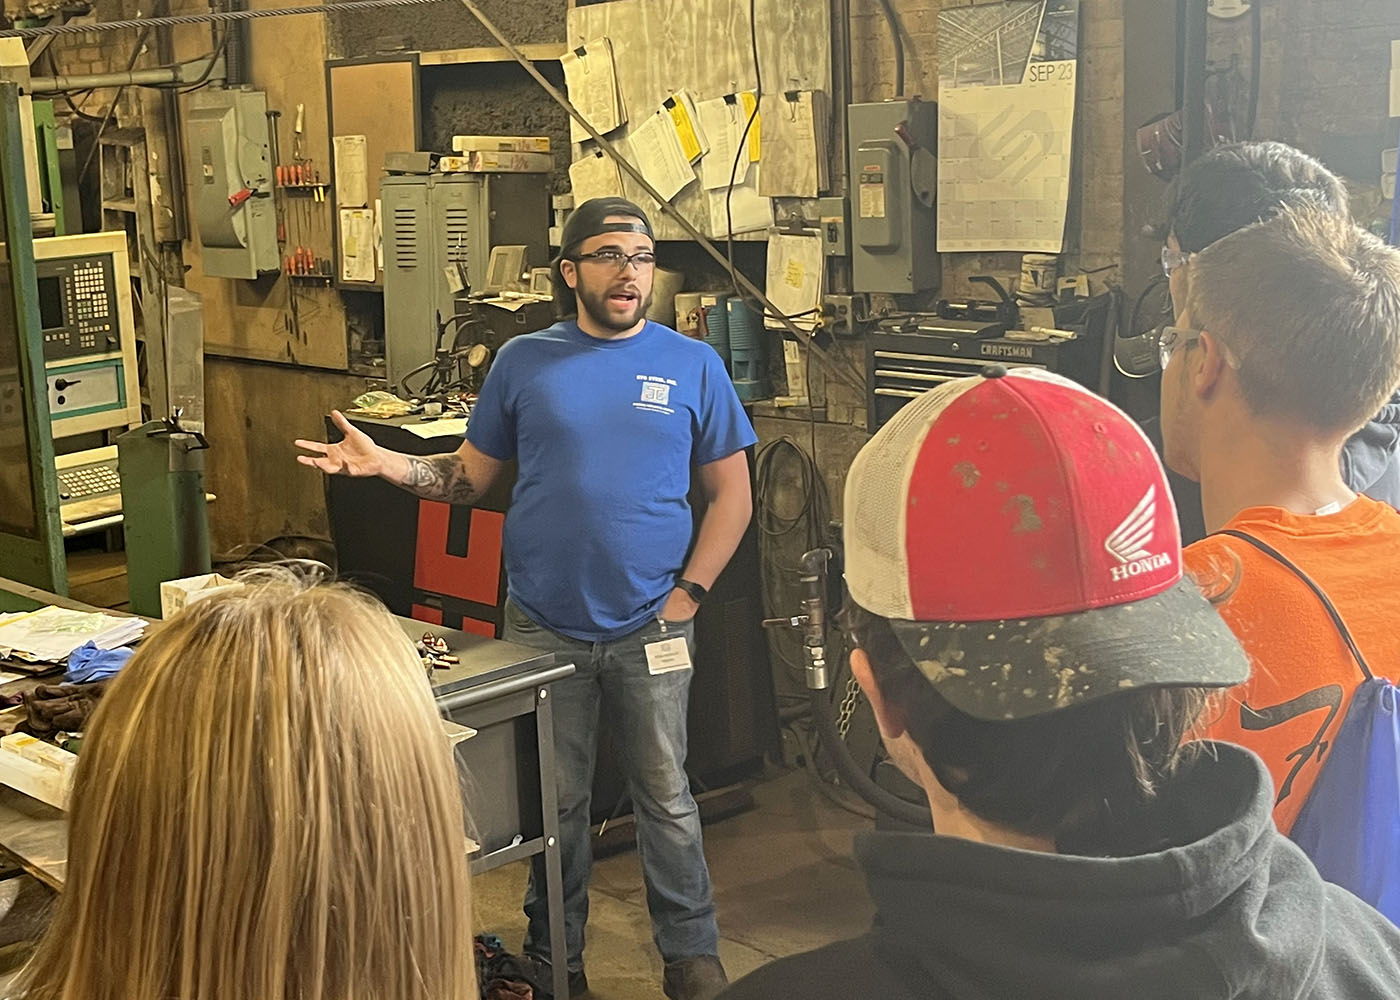 Mike Palleschi, a 2019 graduate of the Welding and Metal Fabrication program, speaks to the class.